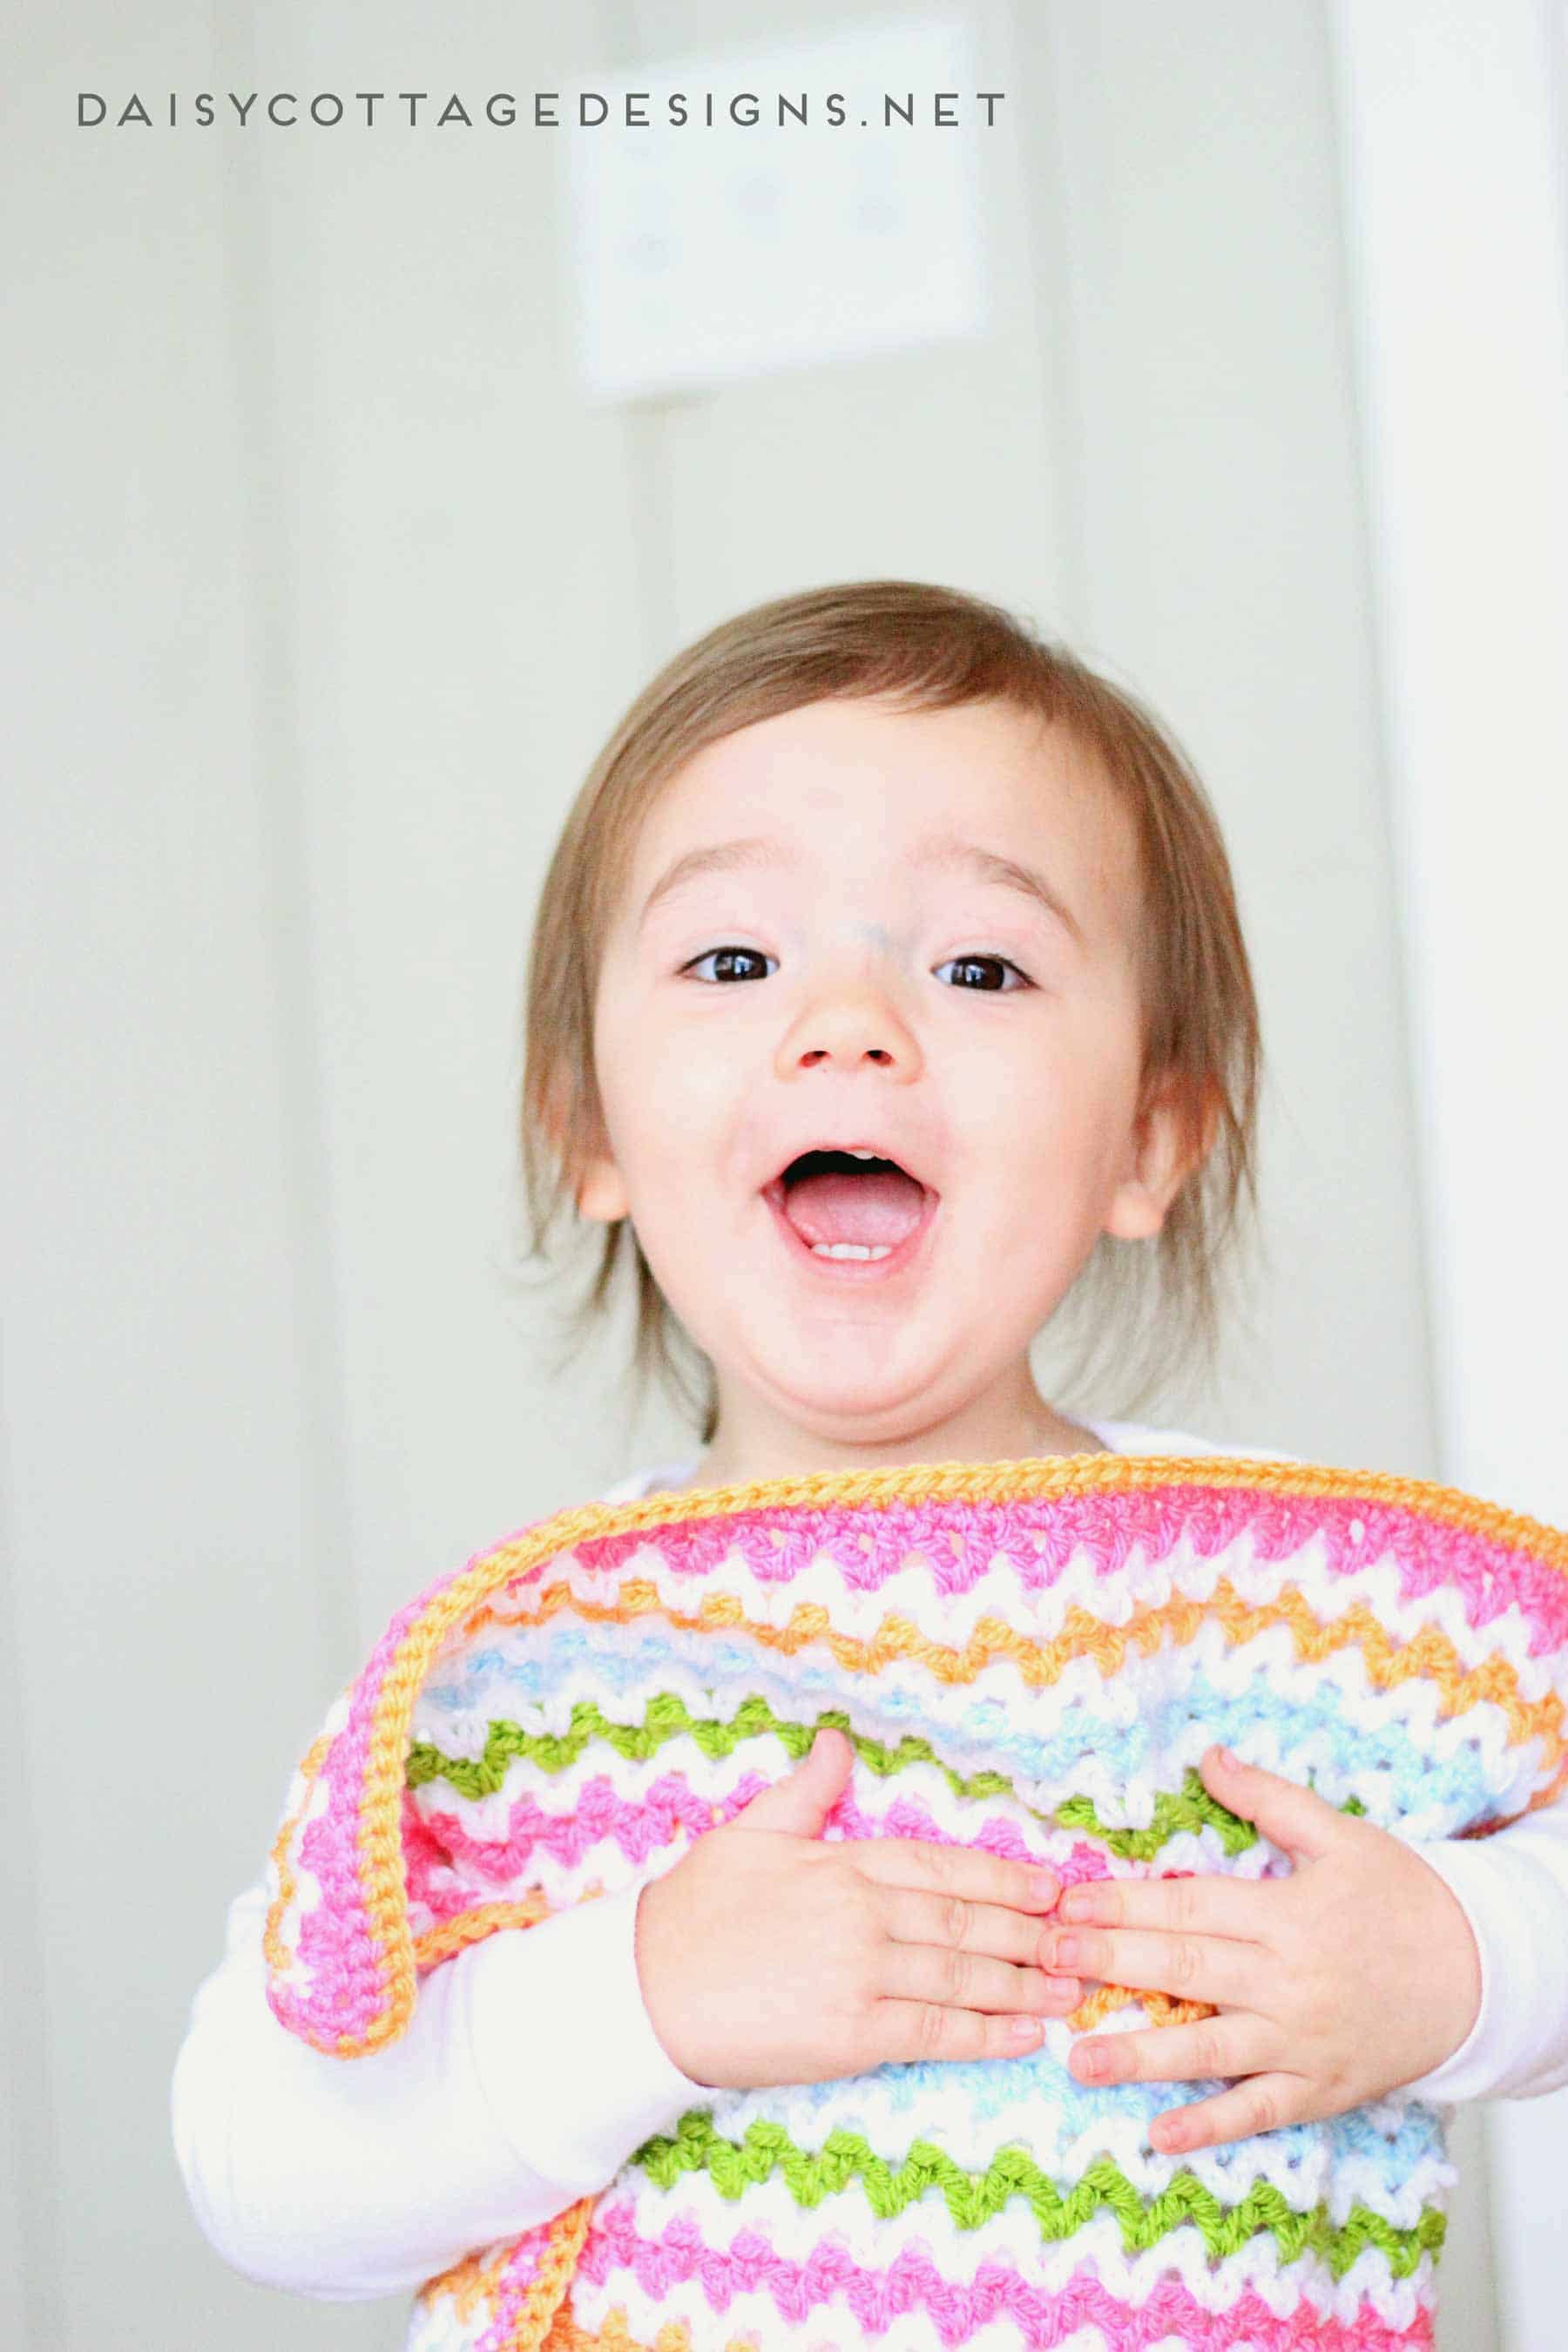 Use this adorable v stitch crochet pattern to create this crochet baby blanket in any size you wish. Free crochet pattern from Daisy Cottage Designs. | baby blanket crochet pattern, easy crochet patter, free crochet pattern, rainbow blanket crochet pattern 